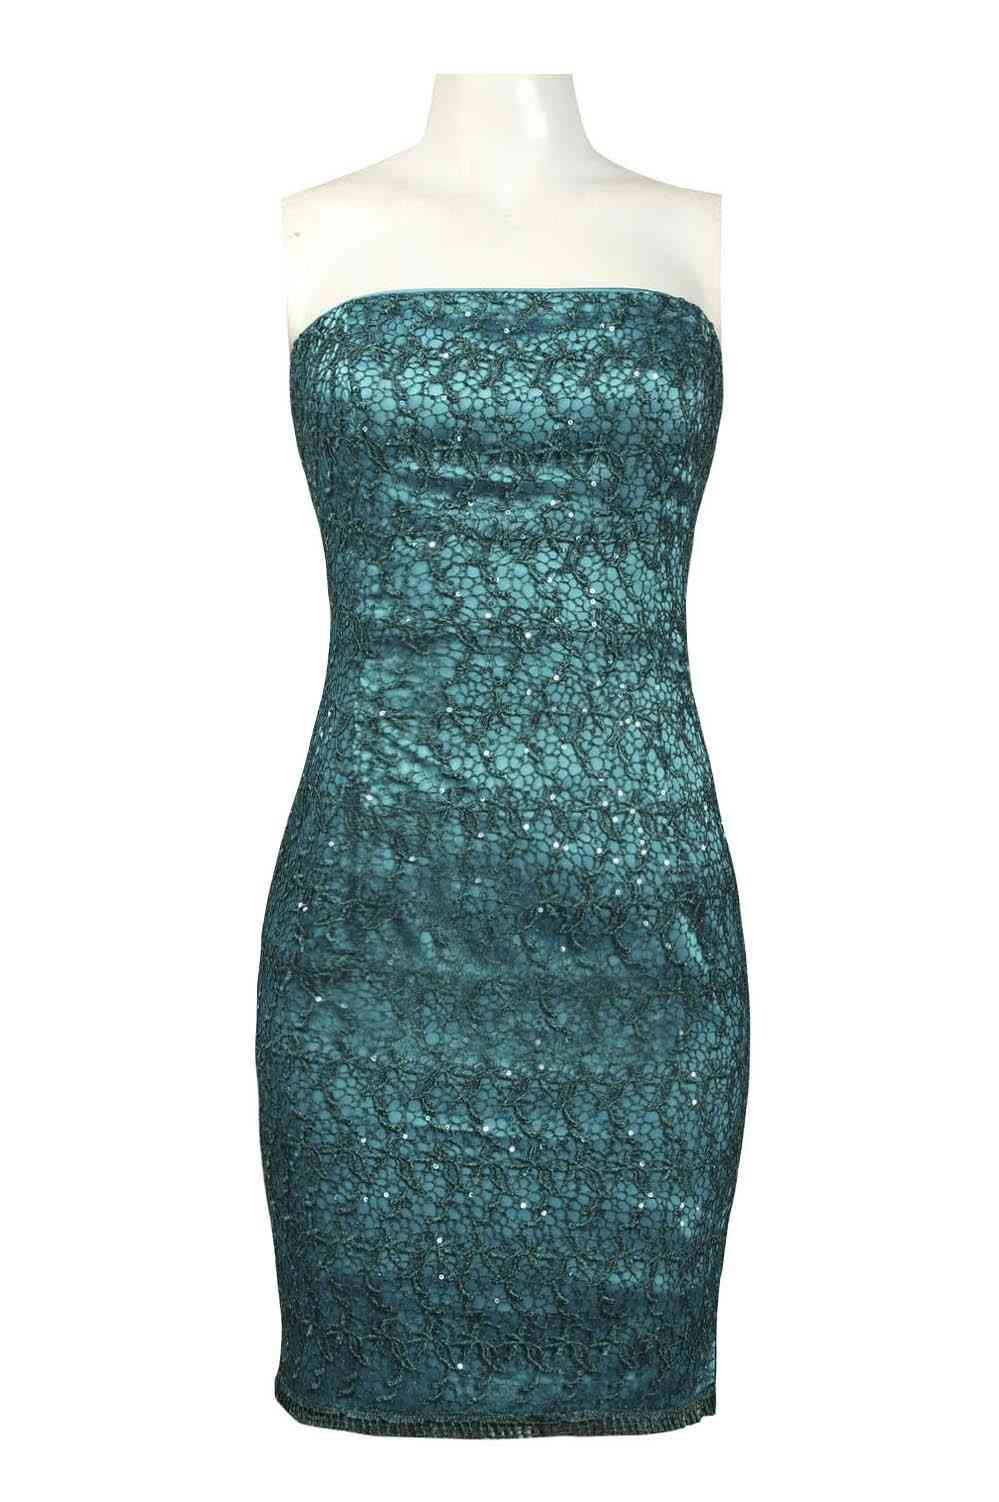 Adrianna Papell Strapless Sequined Lace Sheath Dress